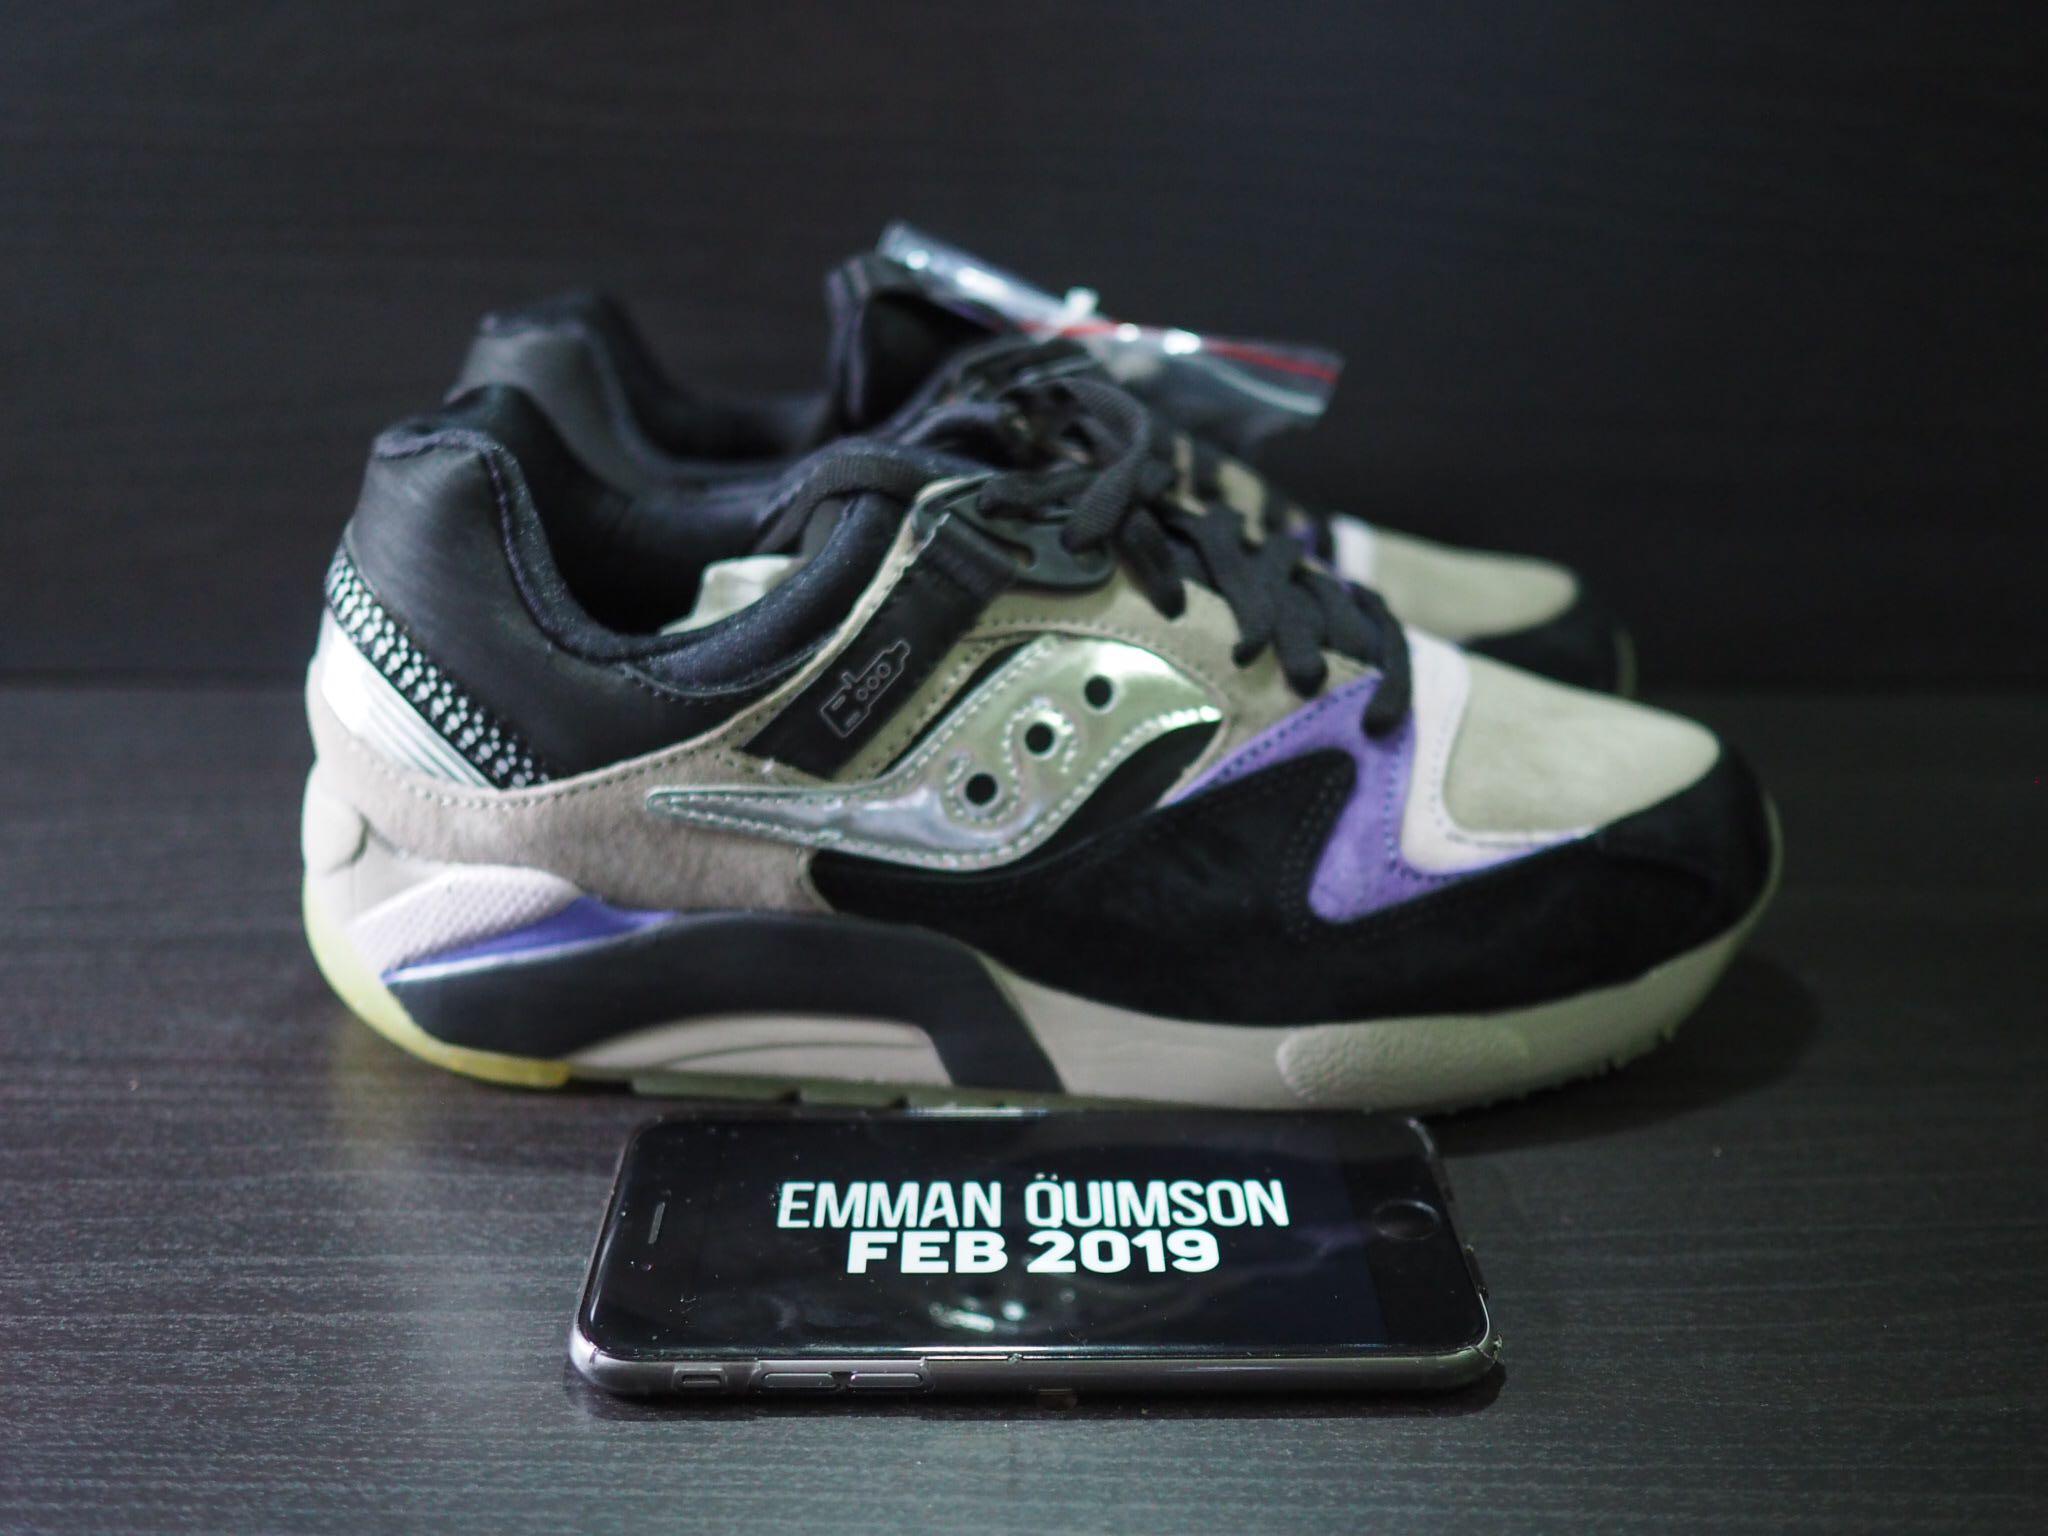 saucony grid 9000 speed lace